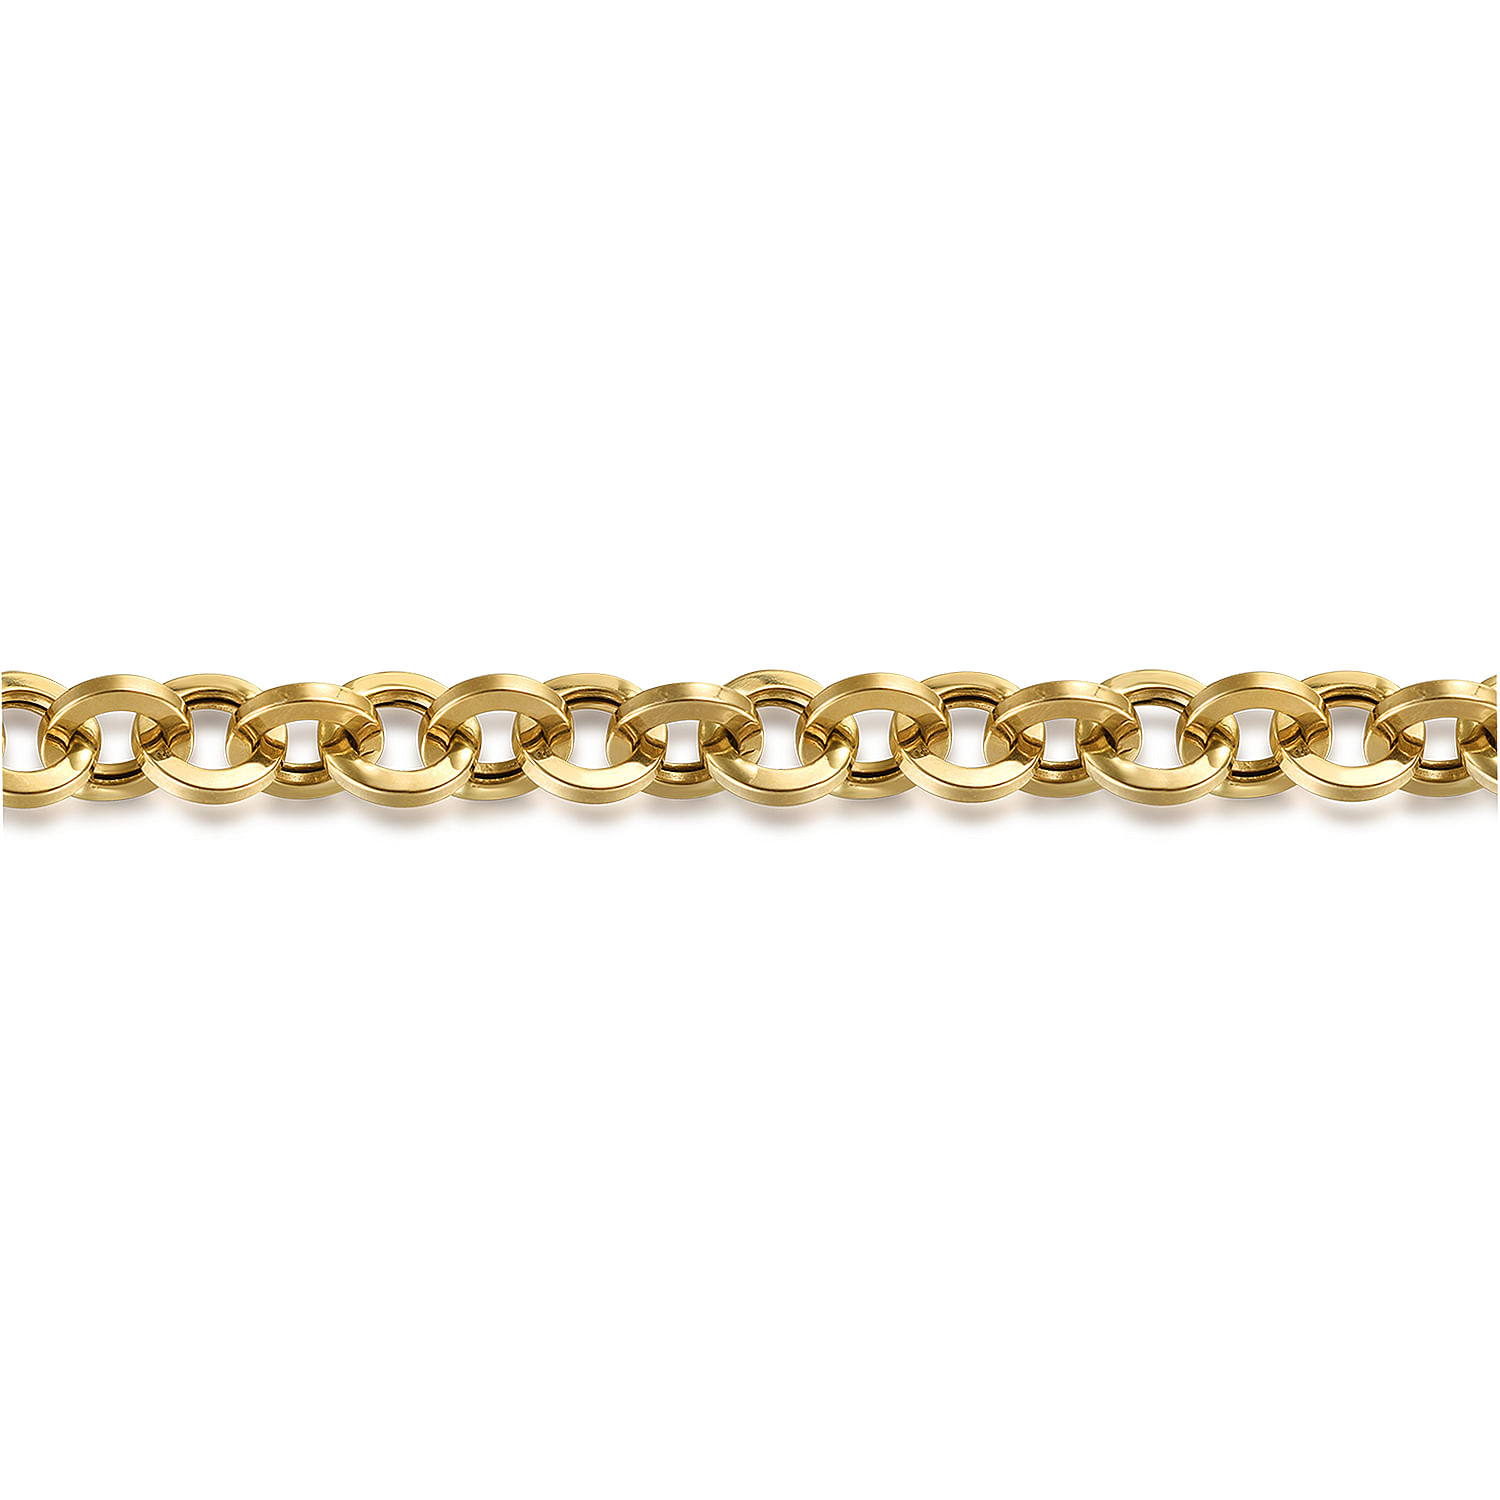 8 Inch 14K Yellow Gold Hollow Link Chain Bracelet